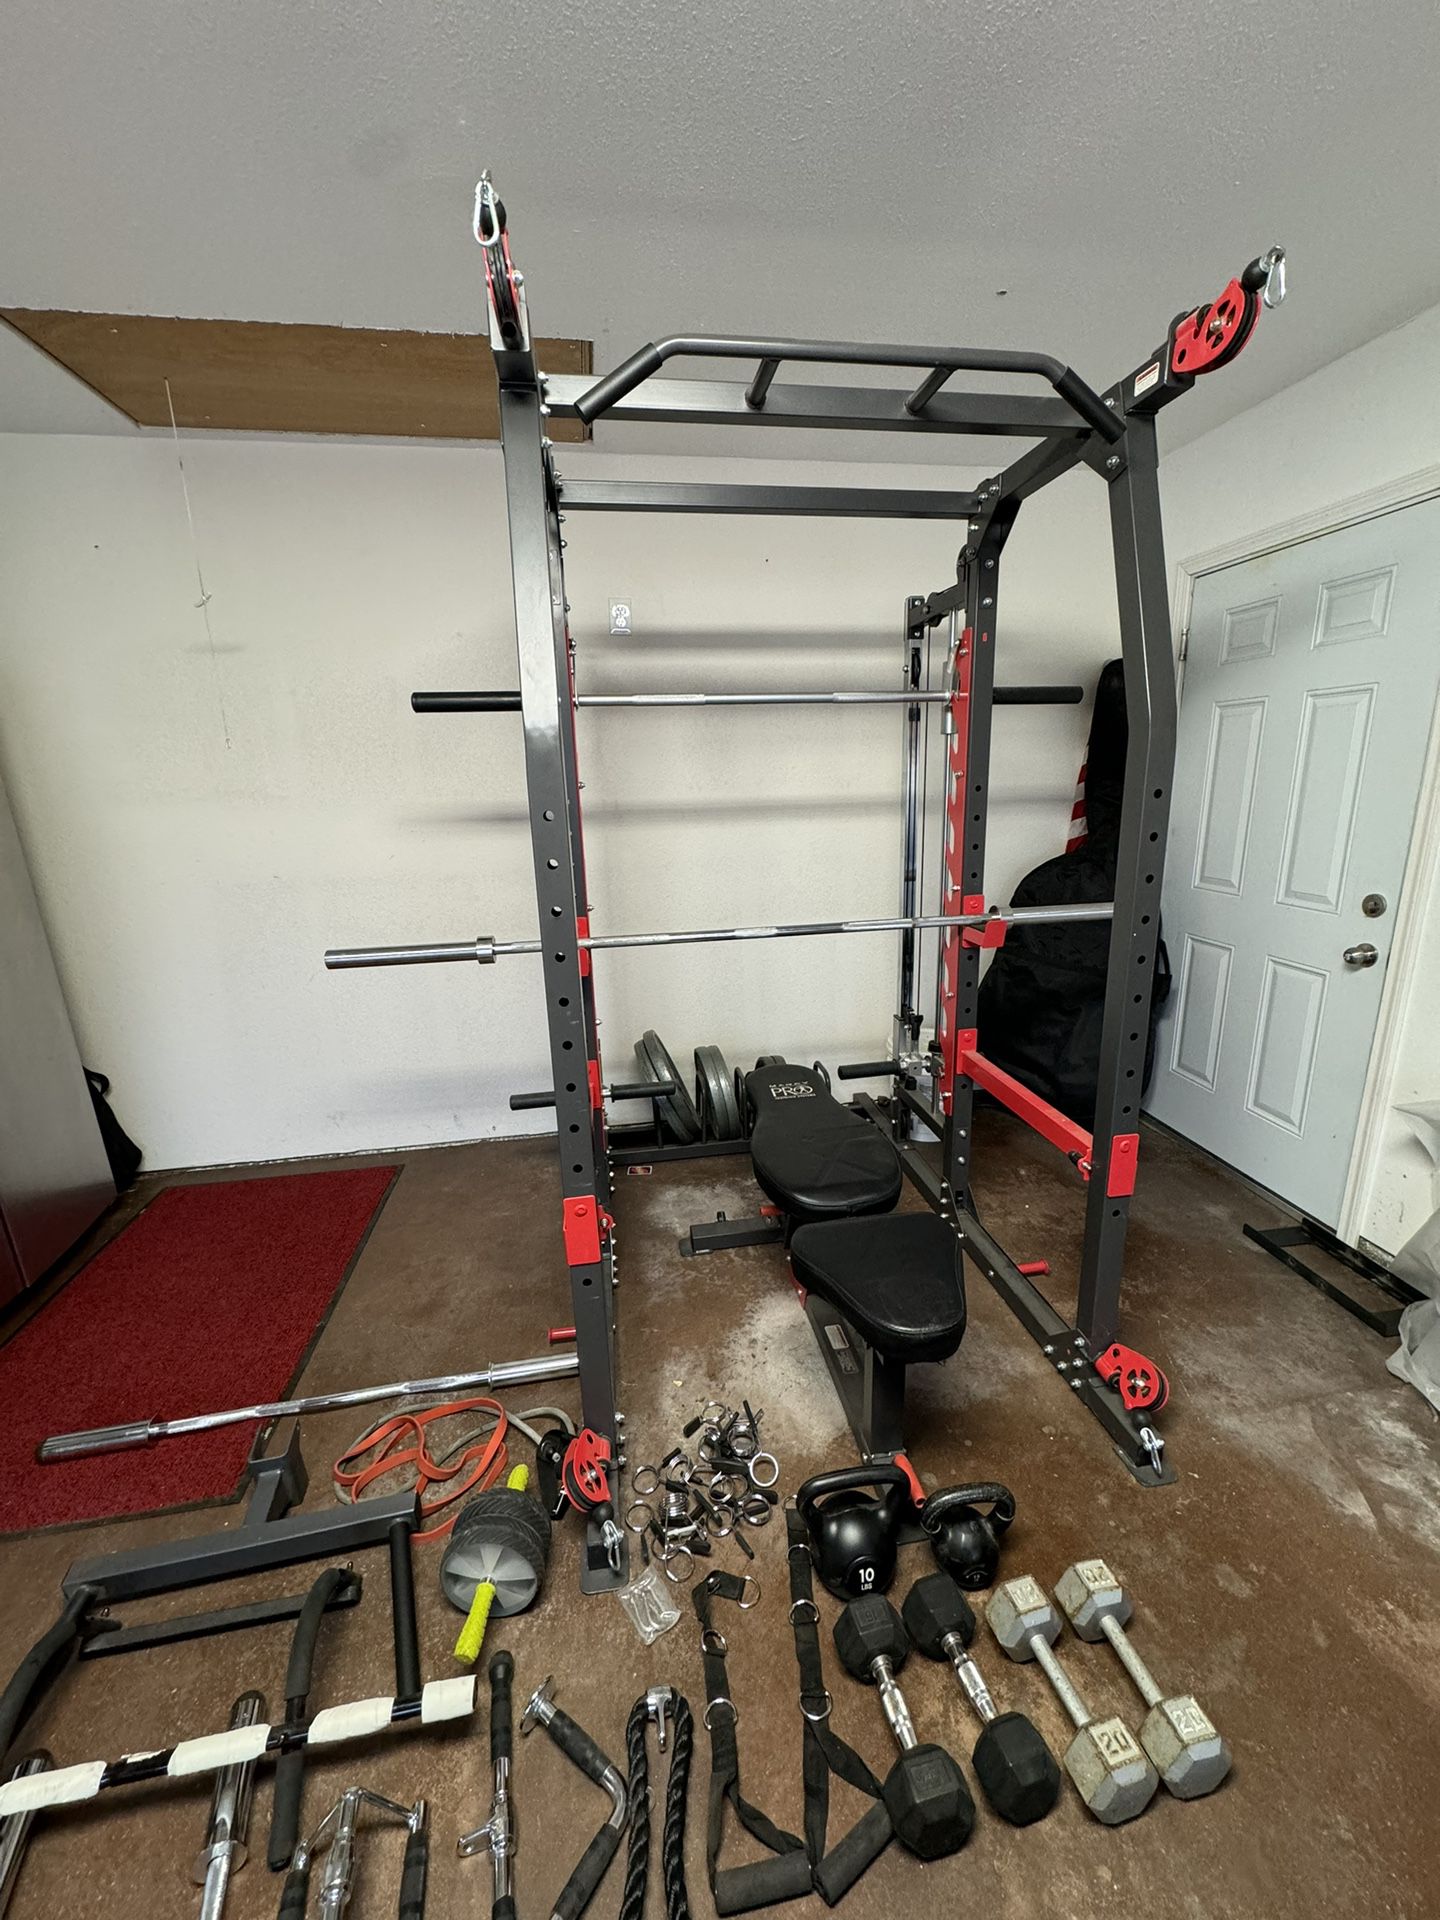 Marcy Home Gym